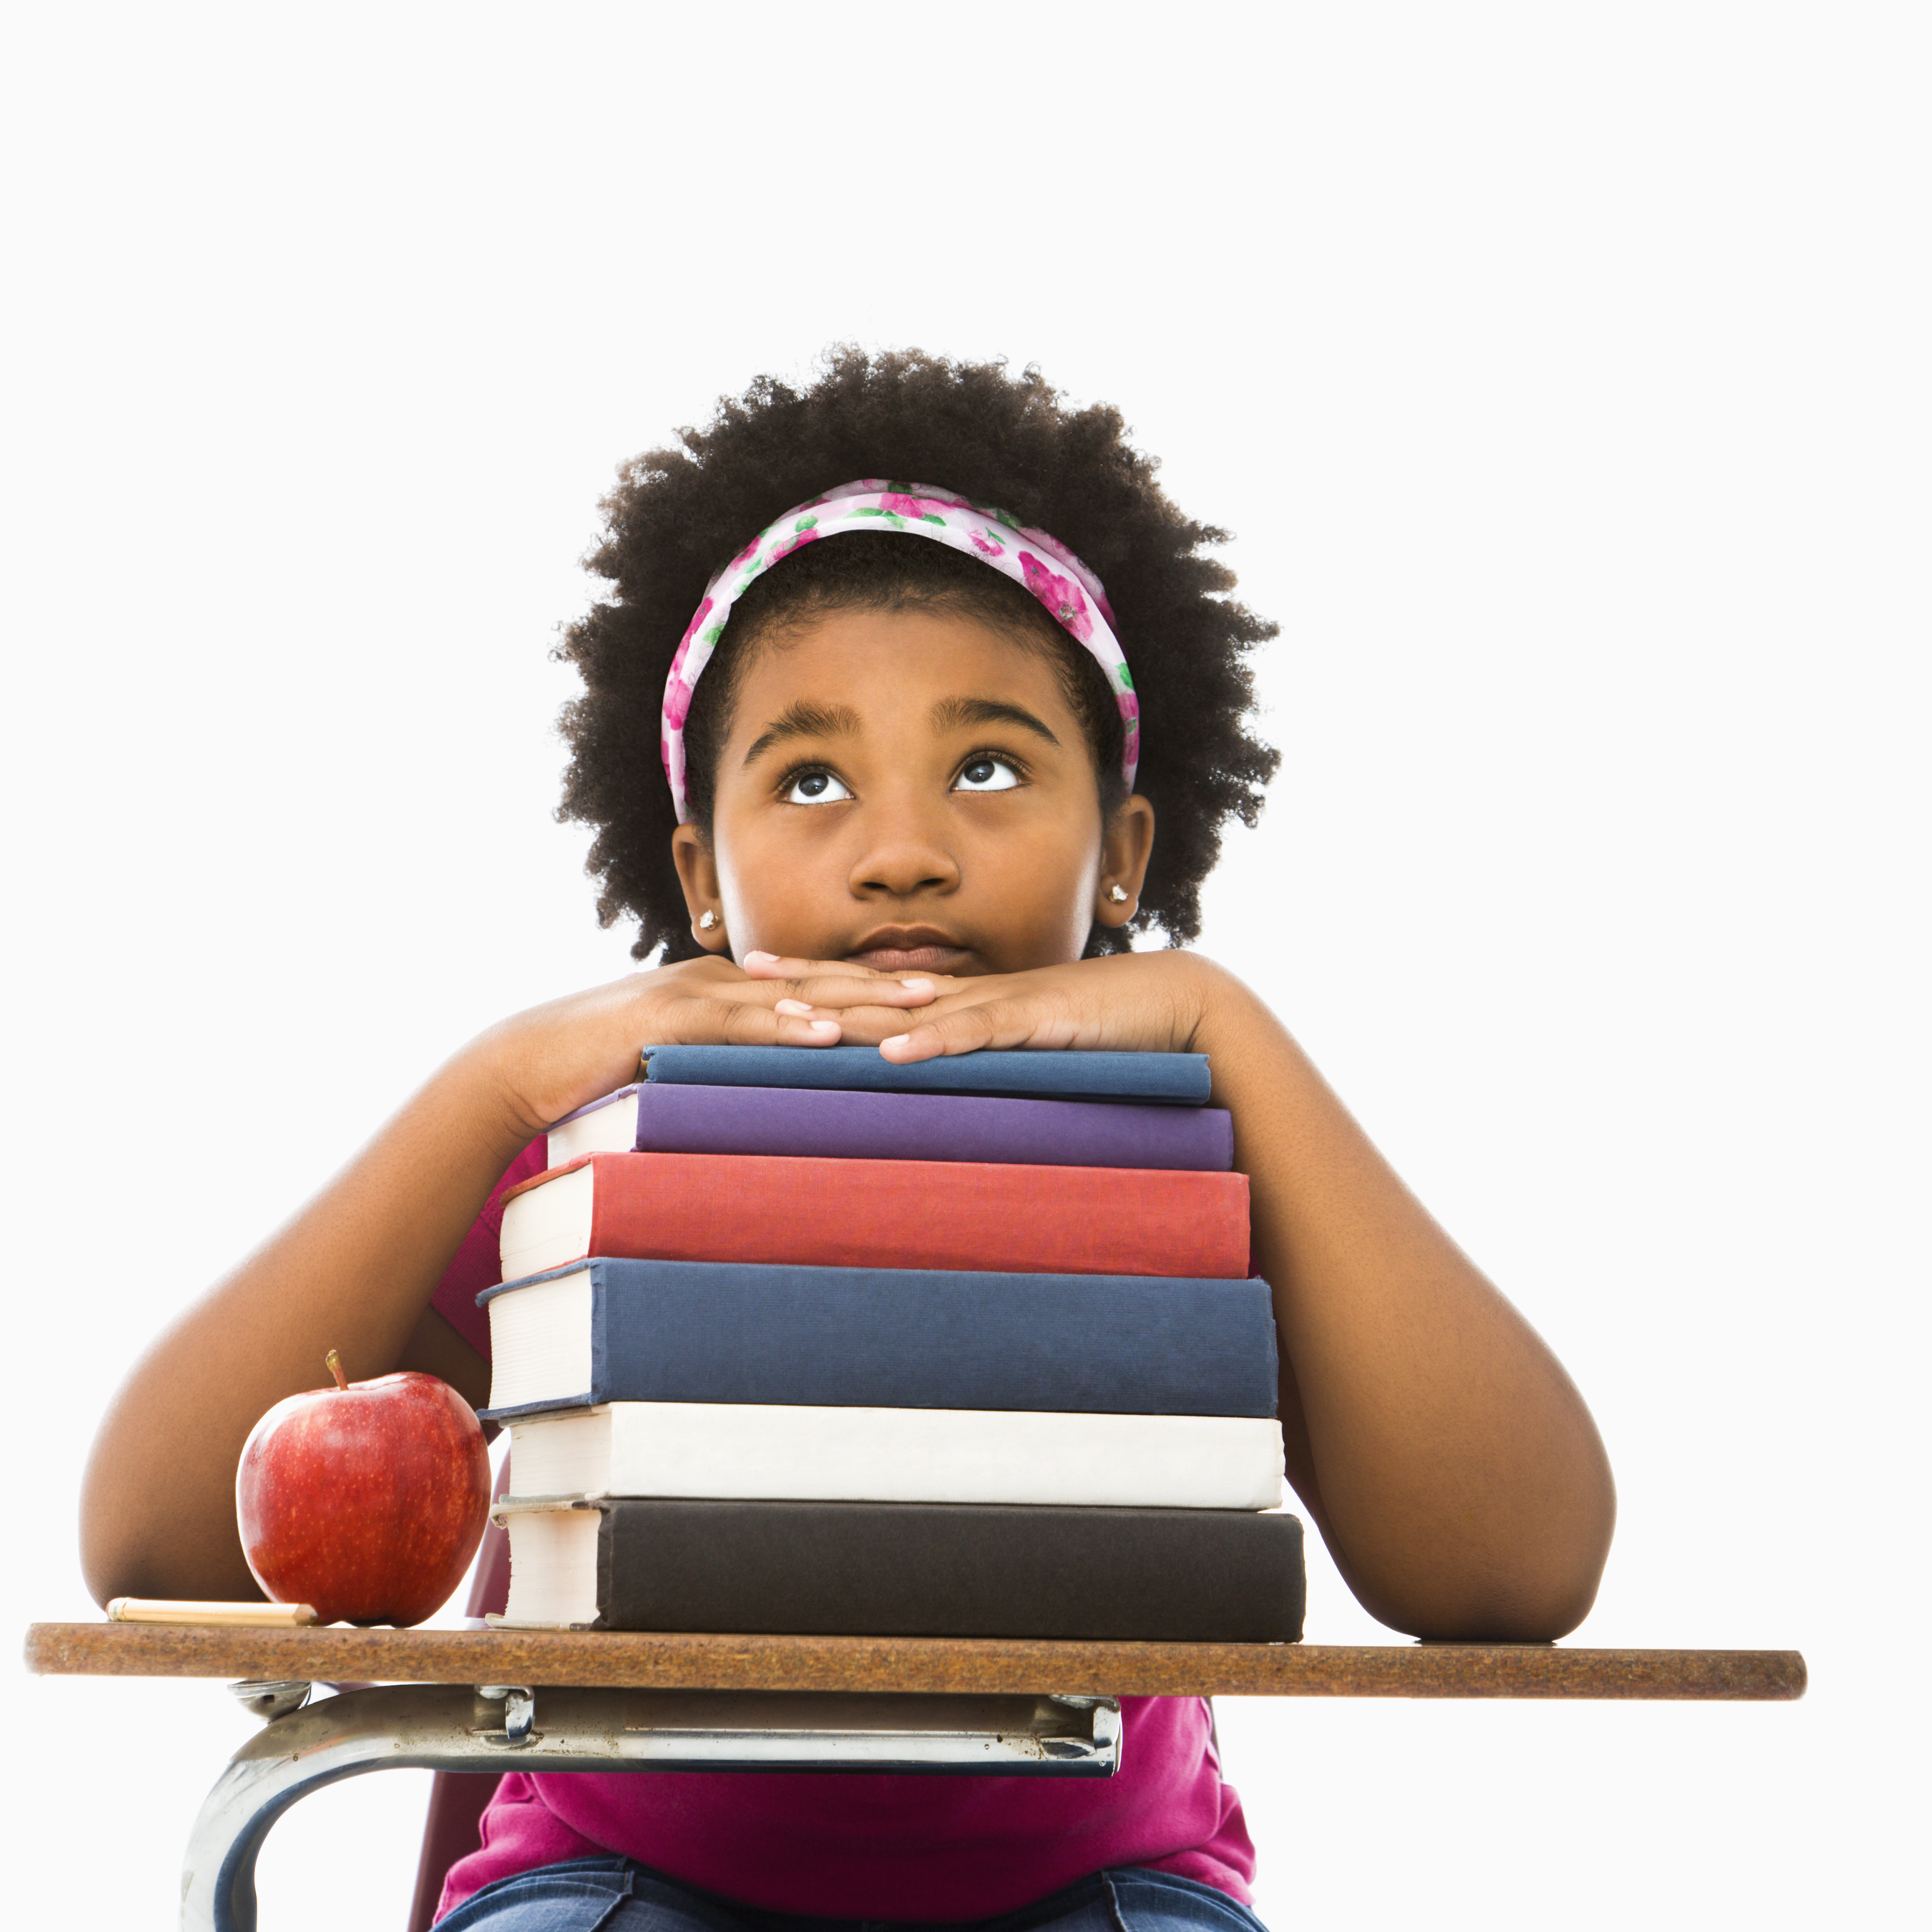 Student sitting in school desk with books and an apple